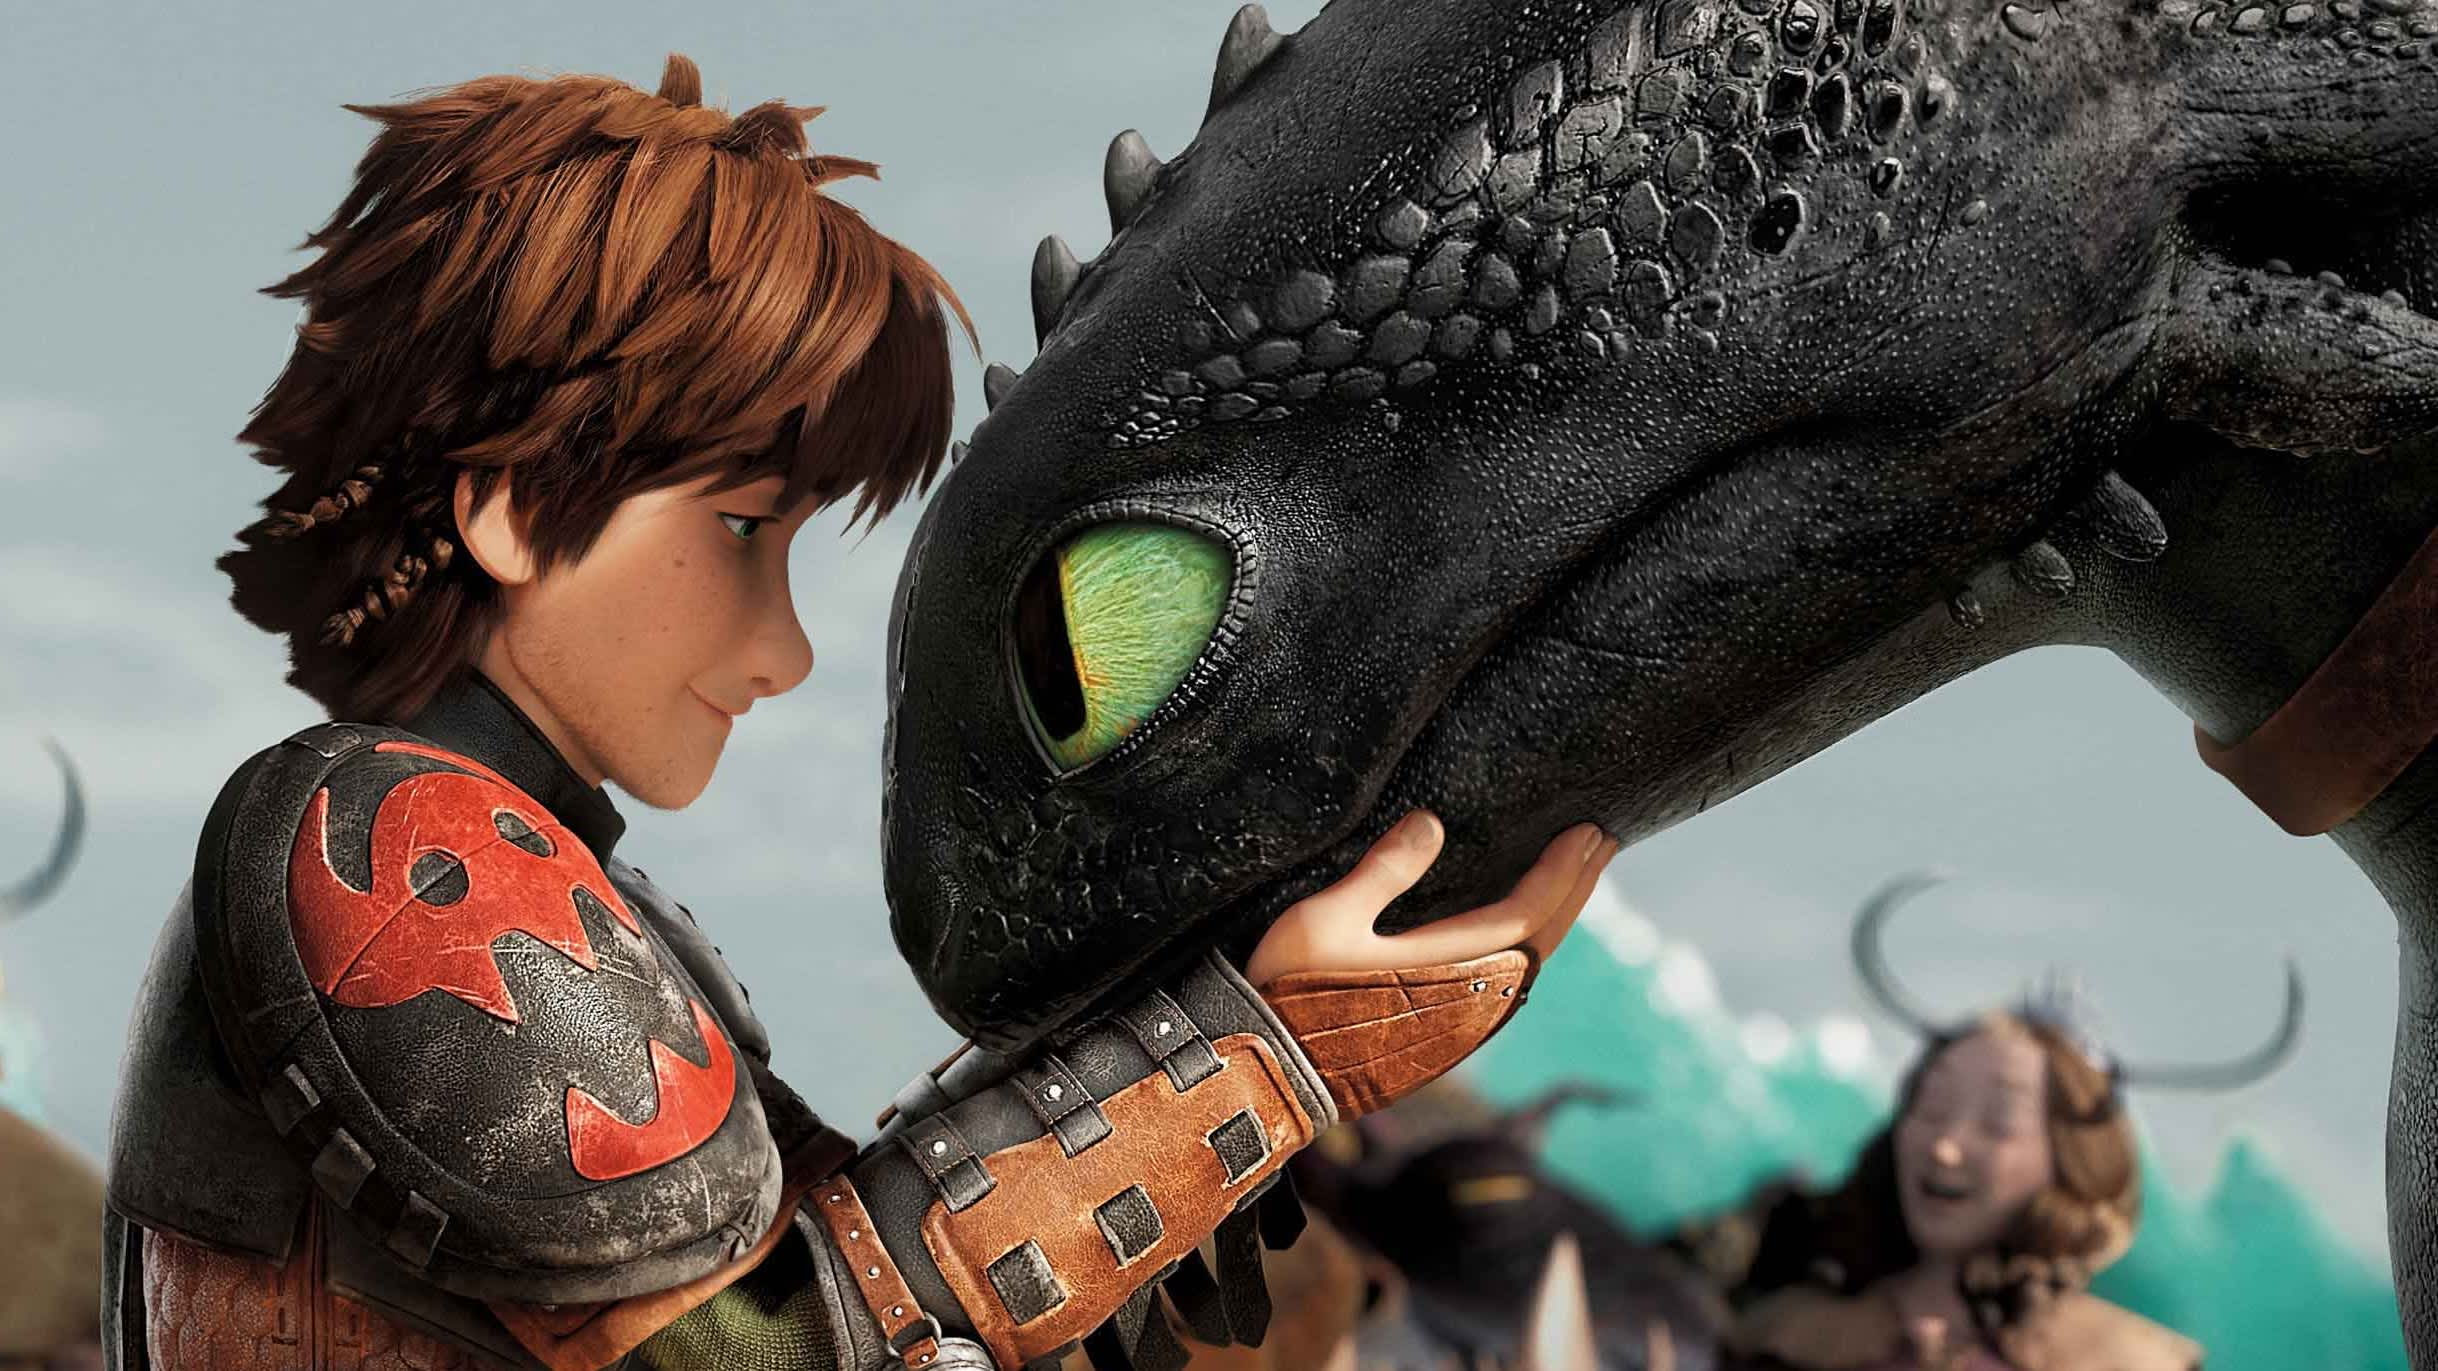 anne schwerin recommends how to train your dragon pics pic